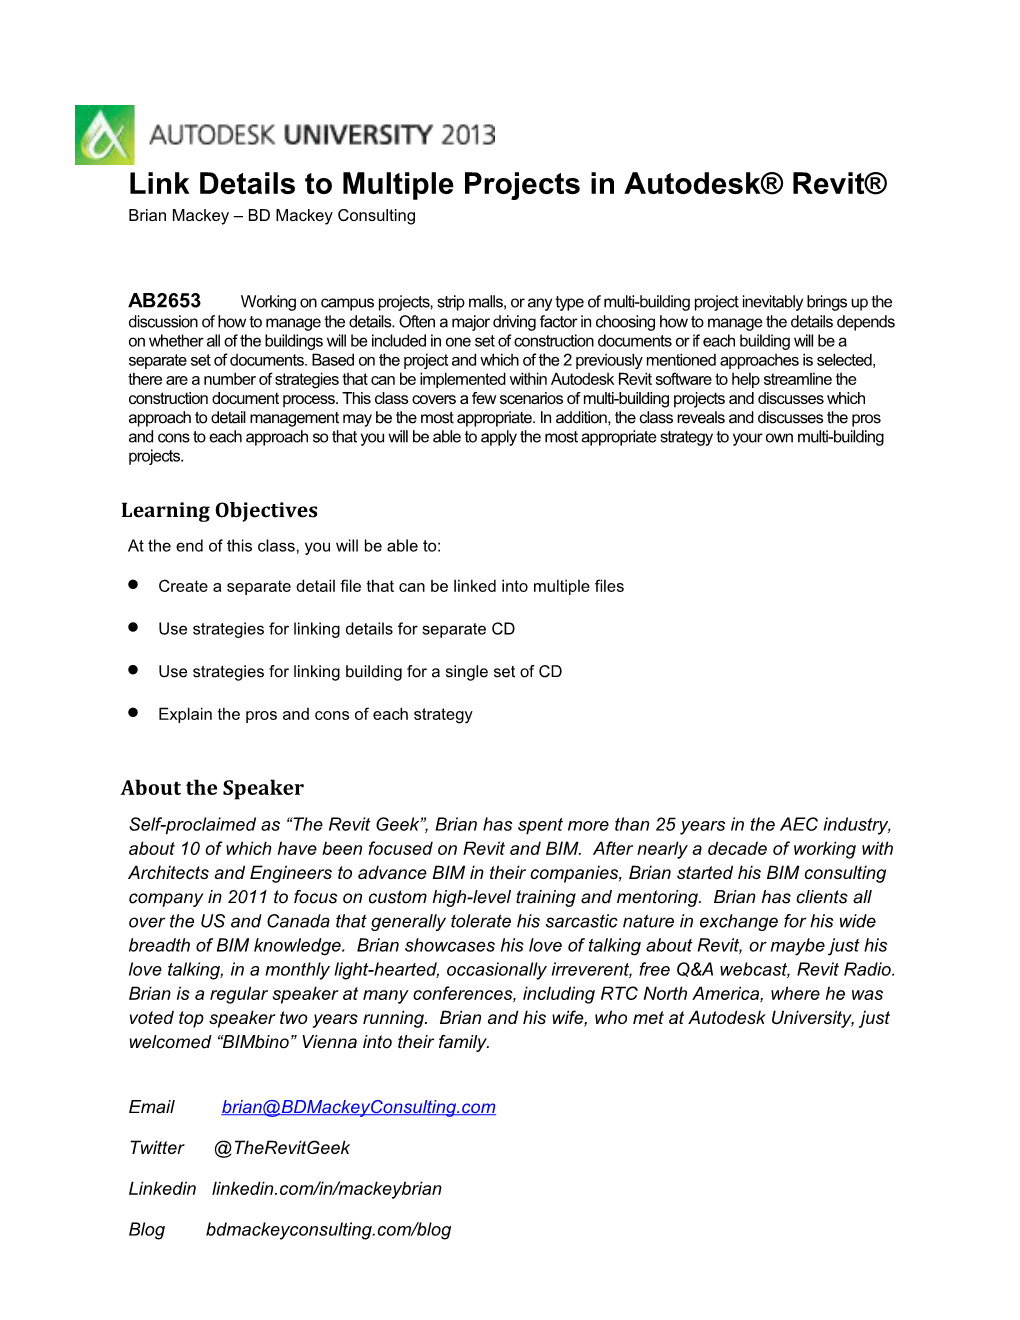 Link Details to Multiple Projects in Autodesk Revit